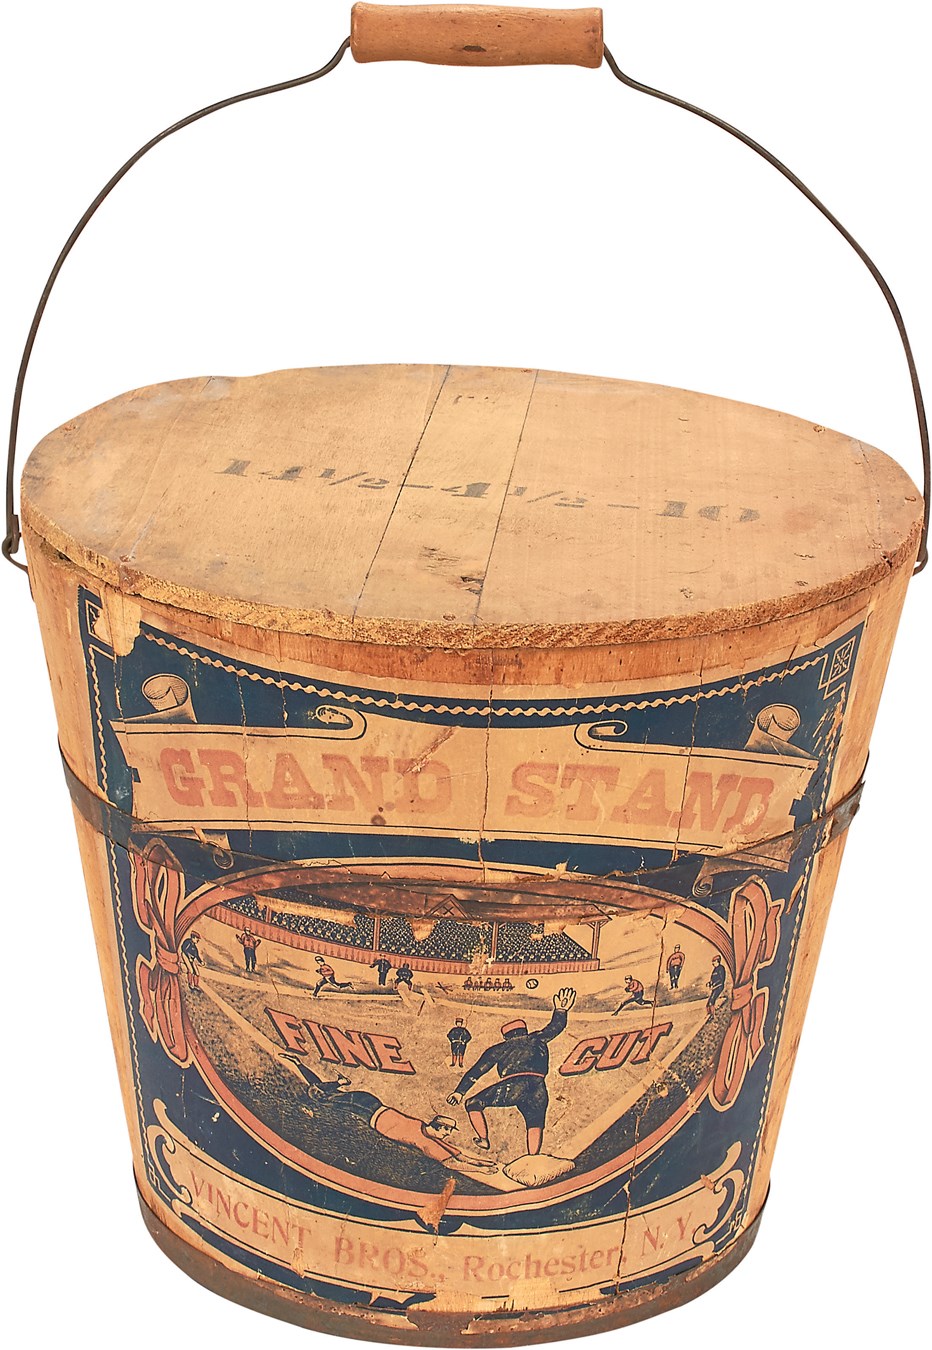 Wonderful 19th Century "Grand Stand" Baseball Tobacco Bucket - Only One Known